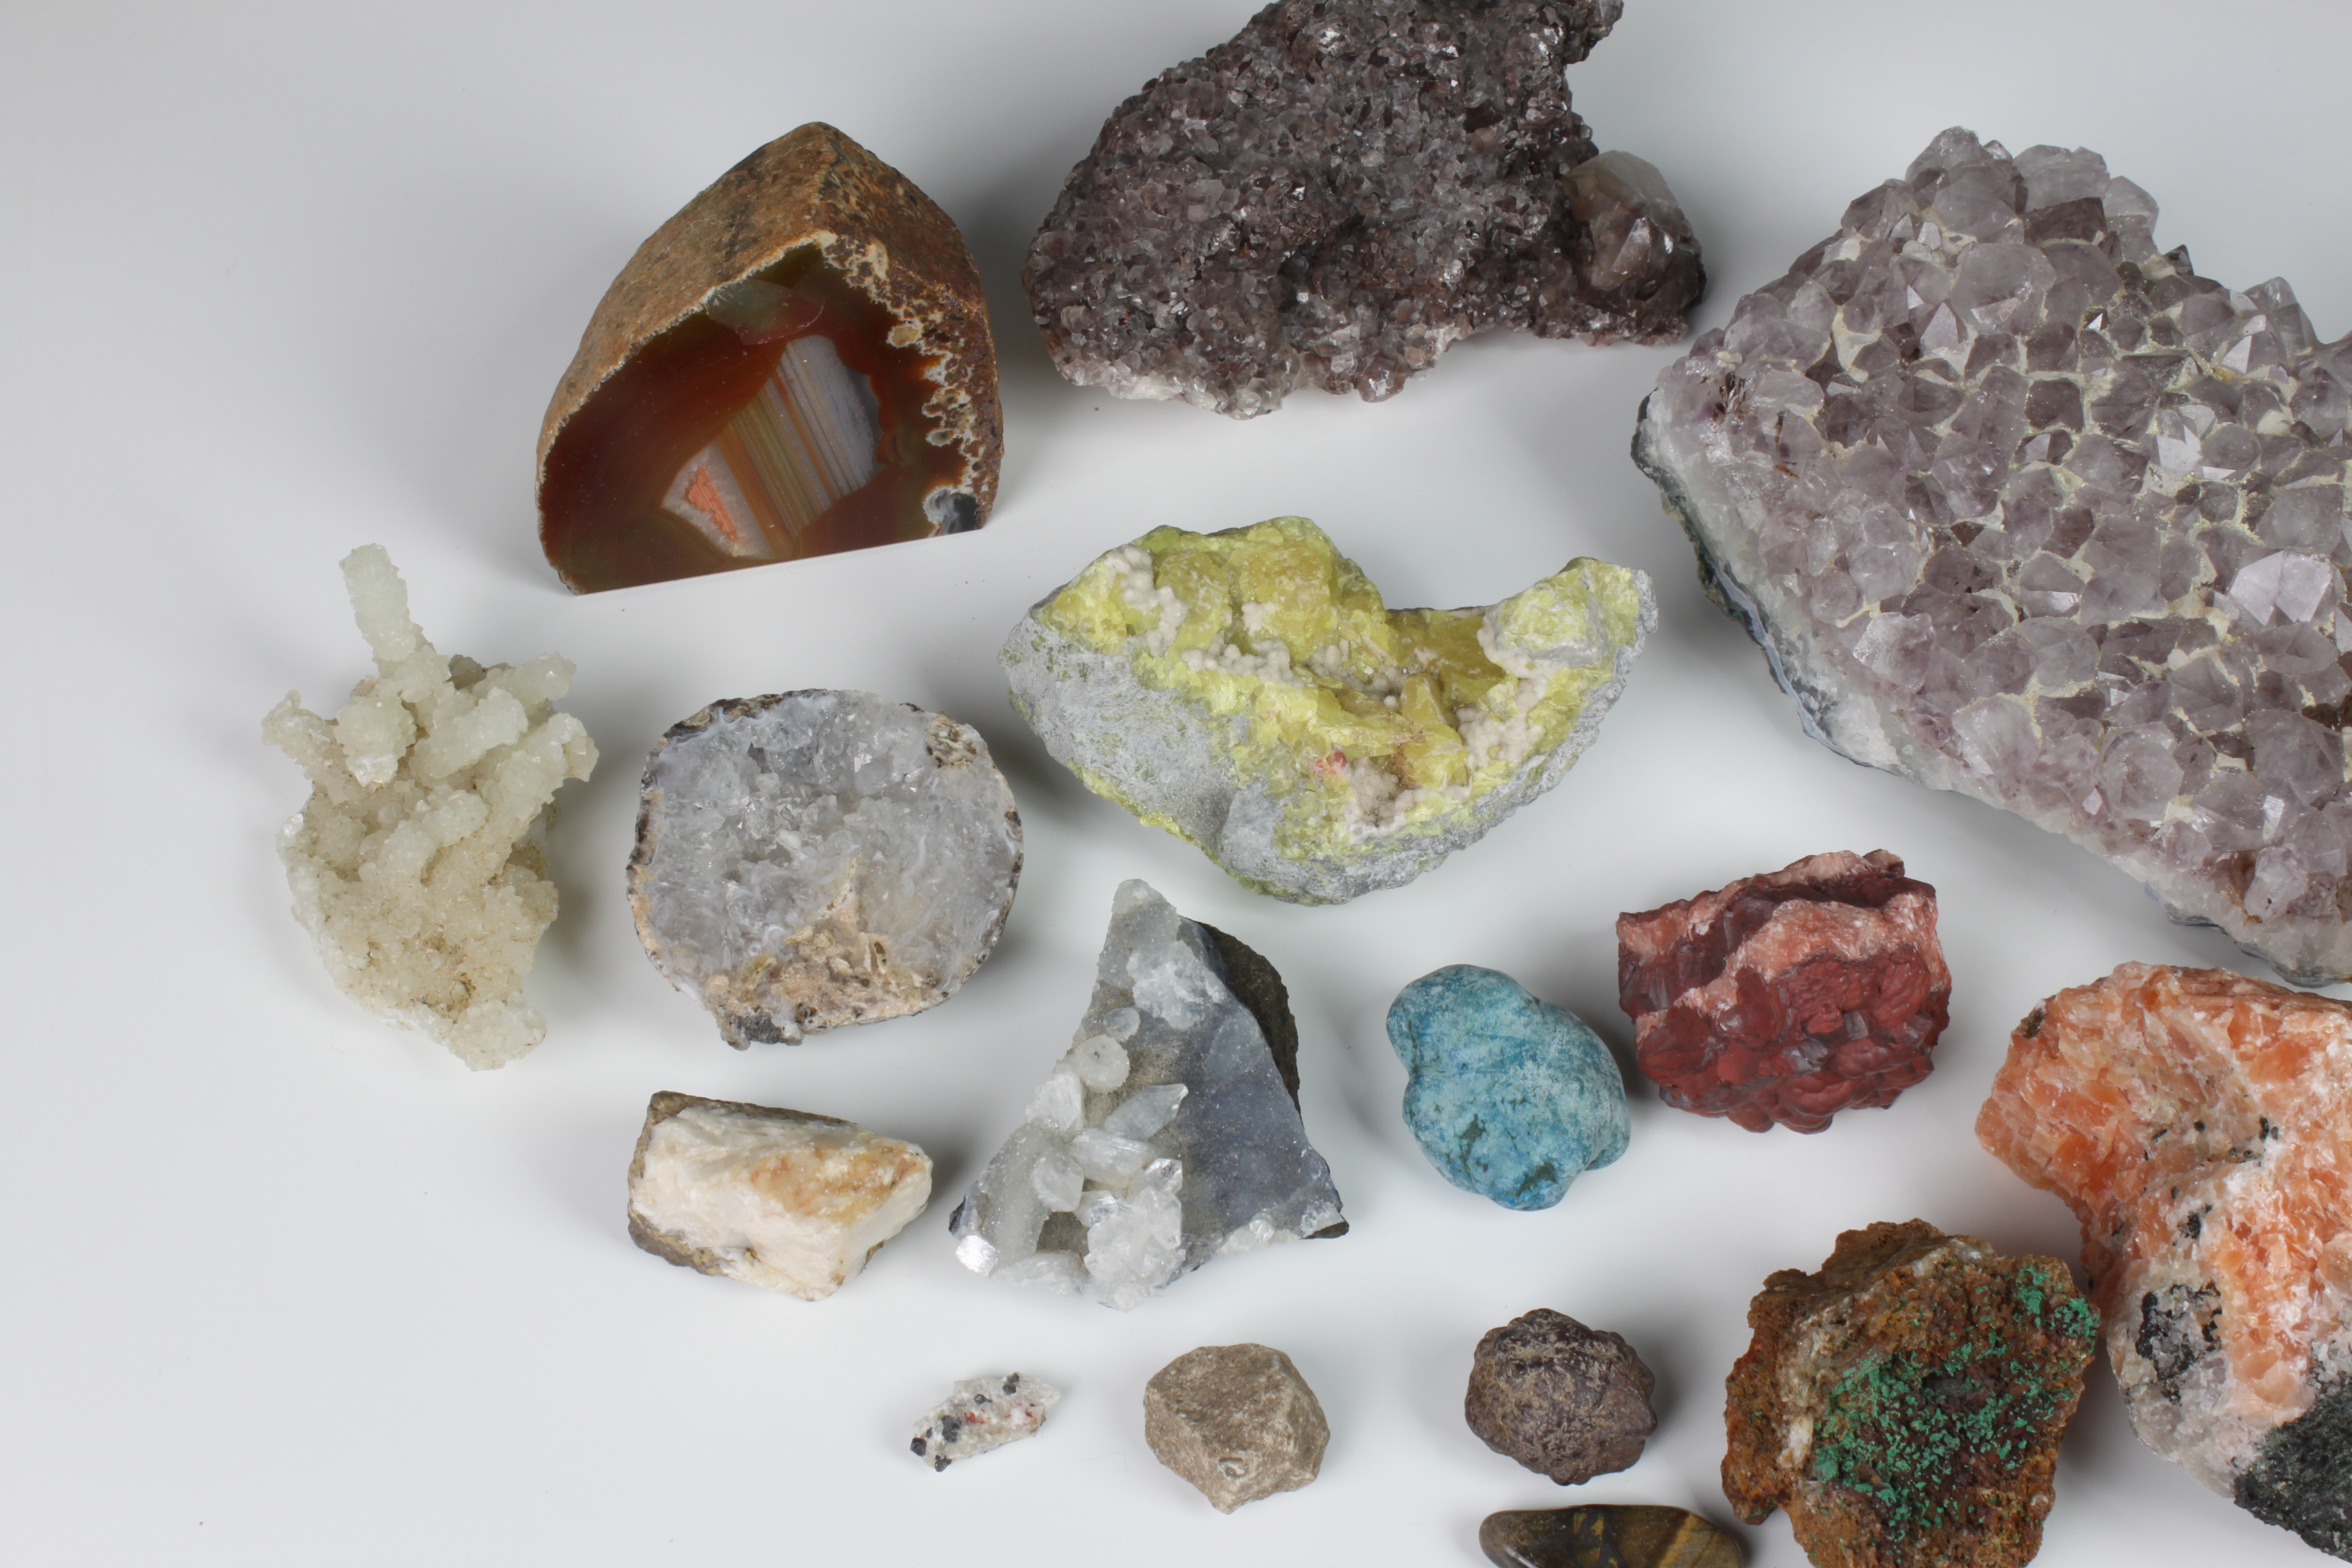 NATURAL HISTORY - A collection of various mineral specimens - fossils etc. - Image 2 of 3